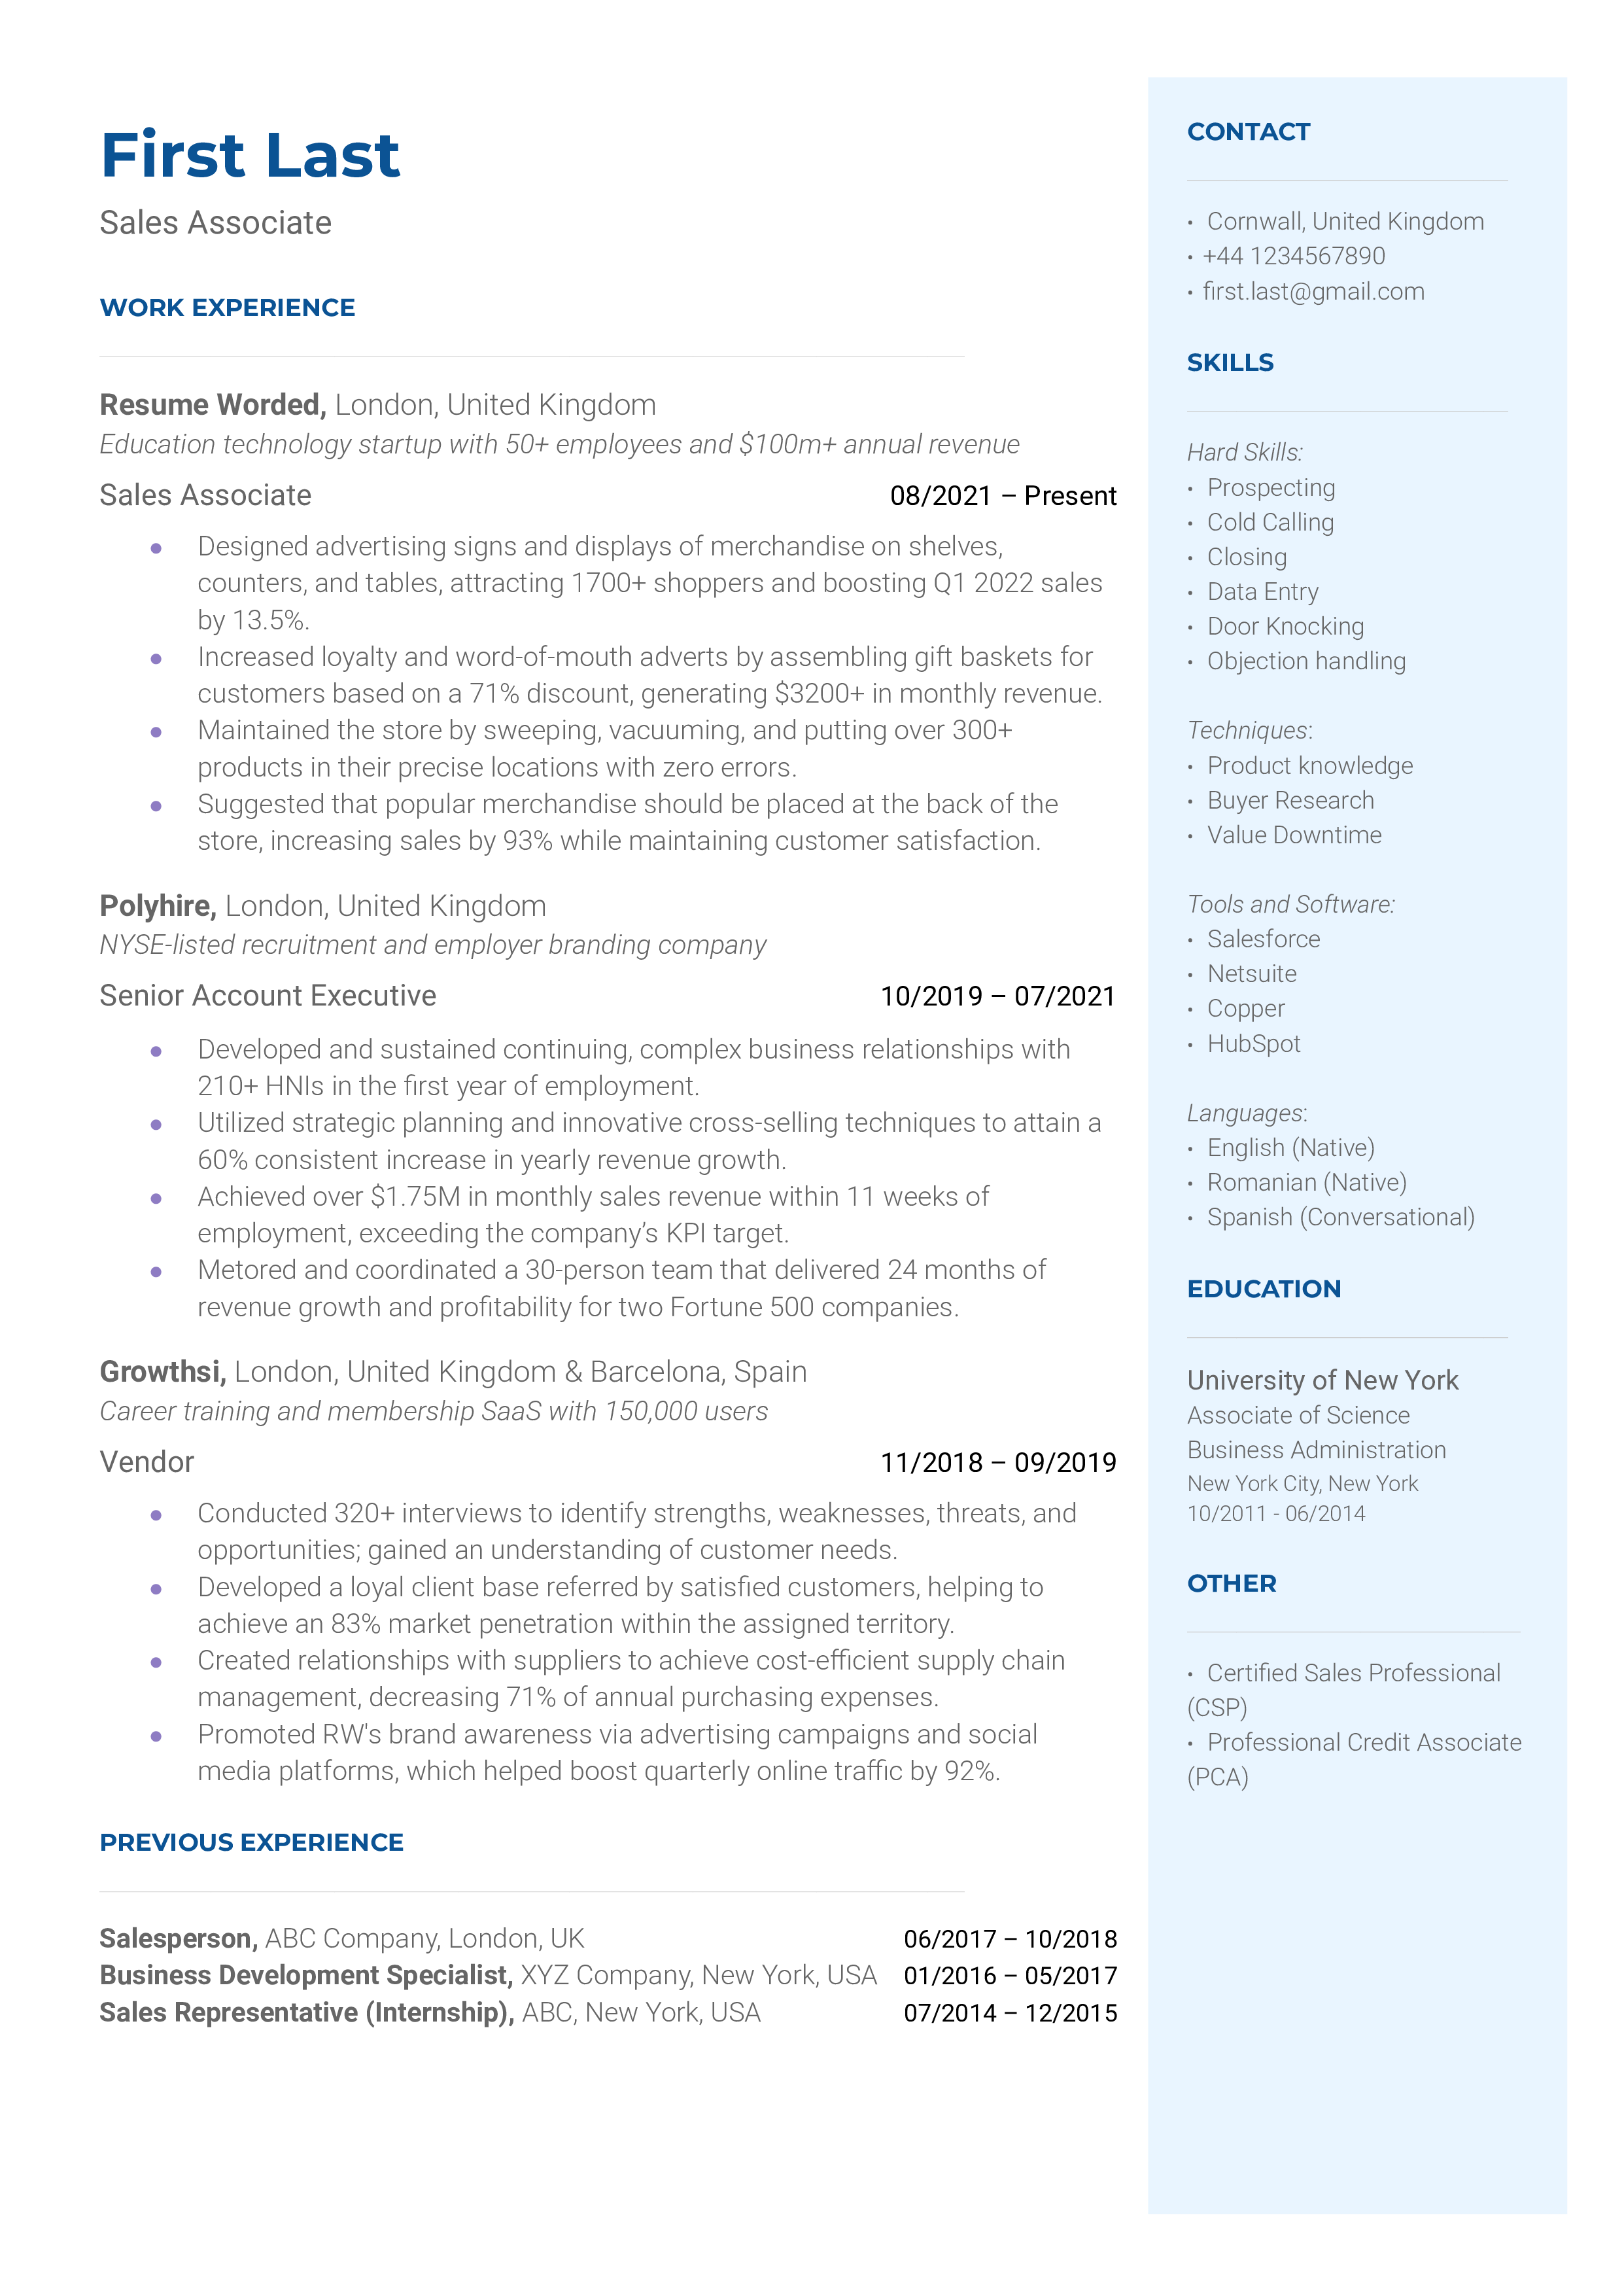 Sales Associate's CV highlighting sales achievements and product knowledge.